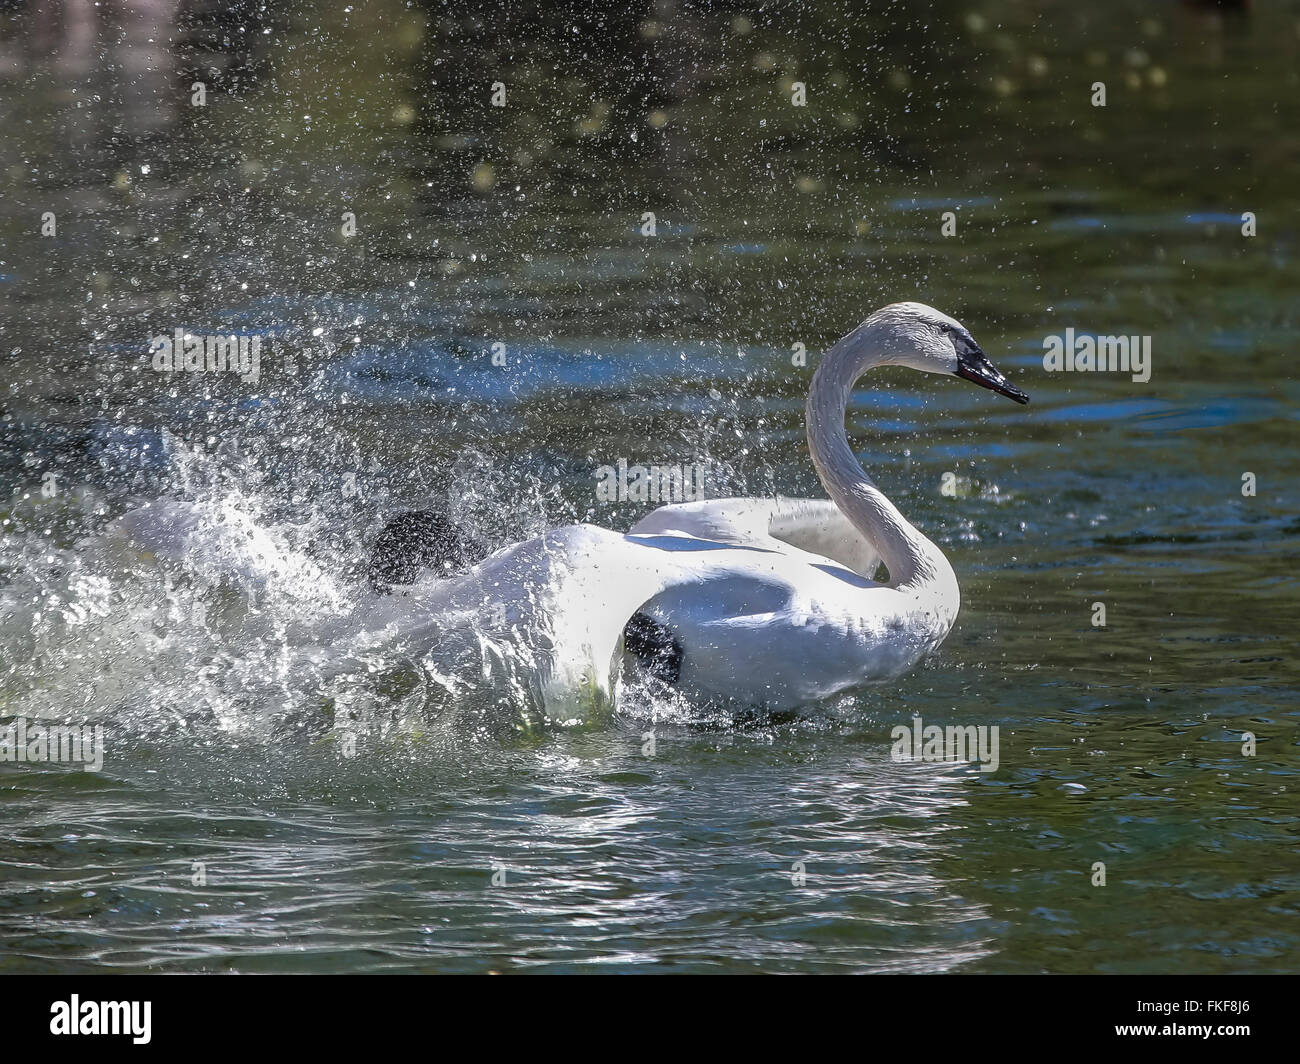 White swan floats in blue water of lake Stock Photo